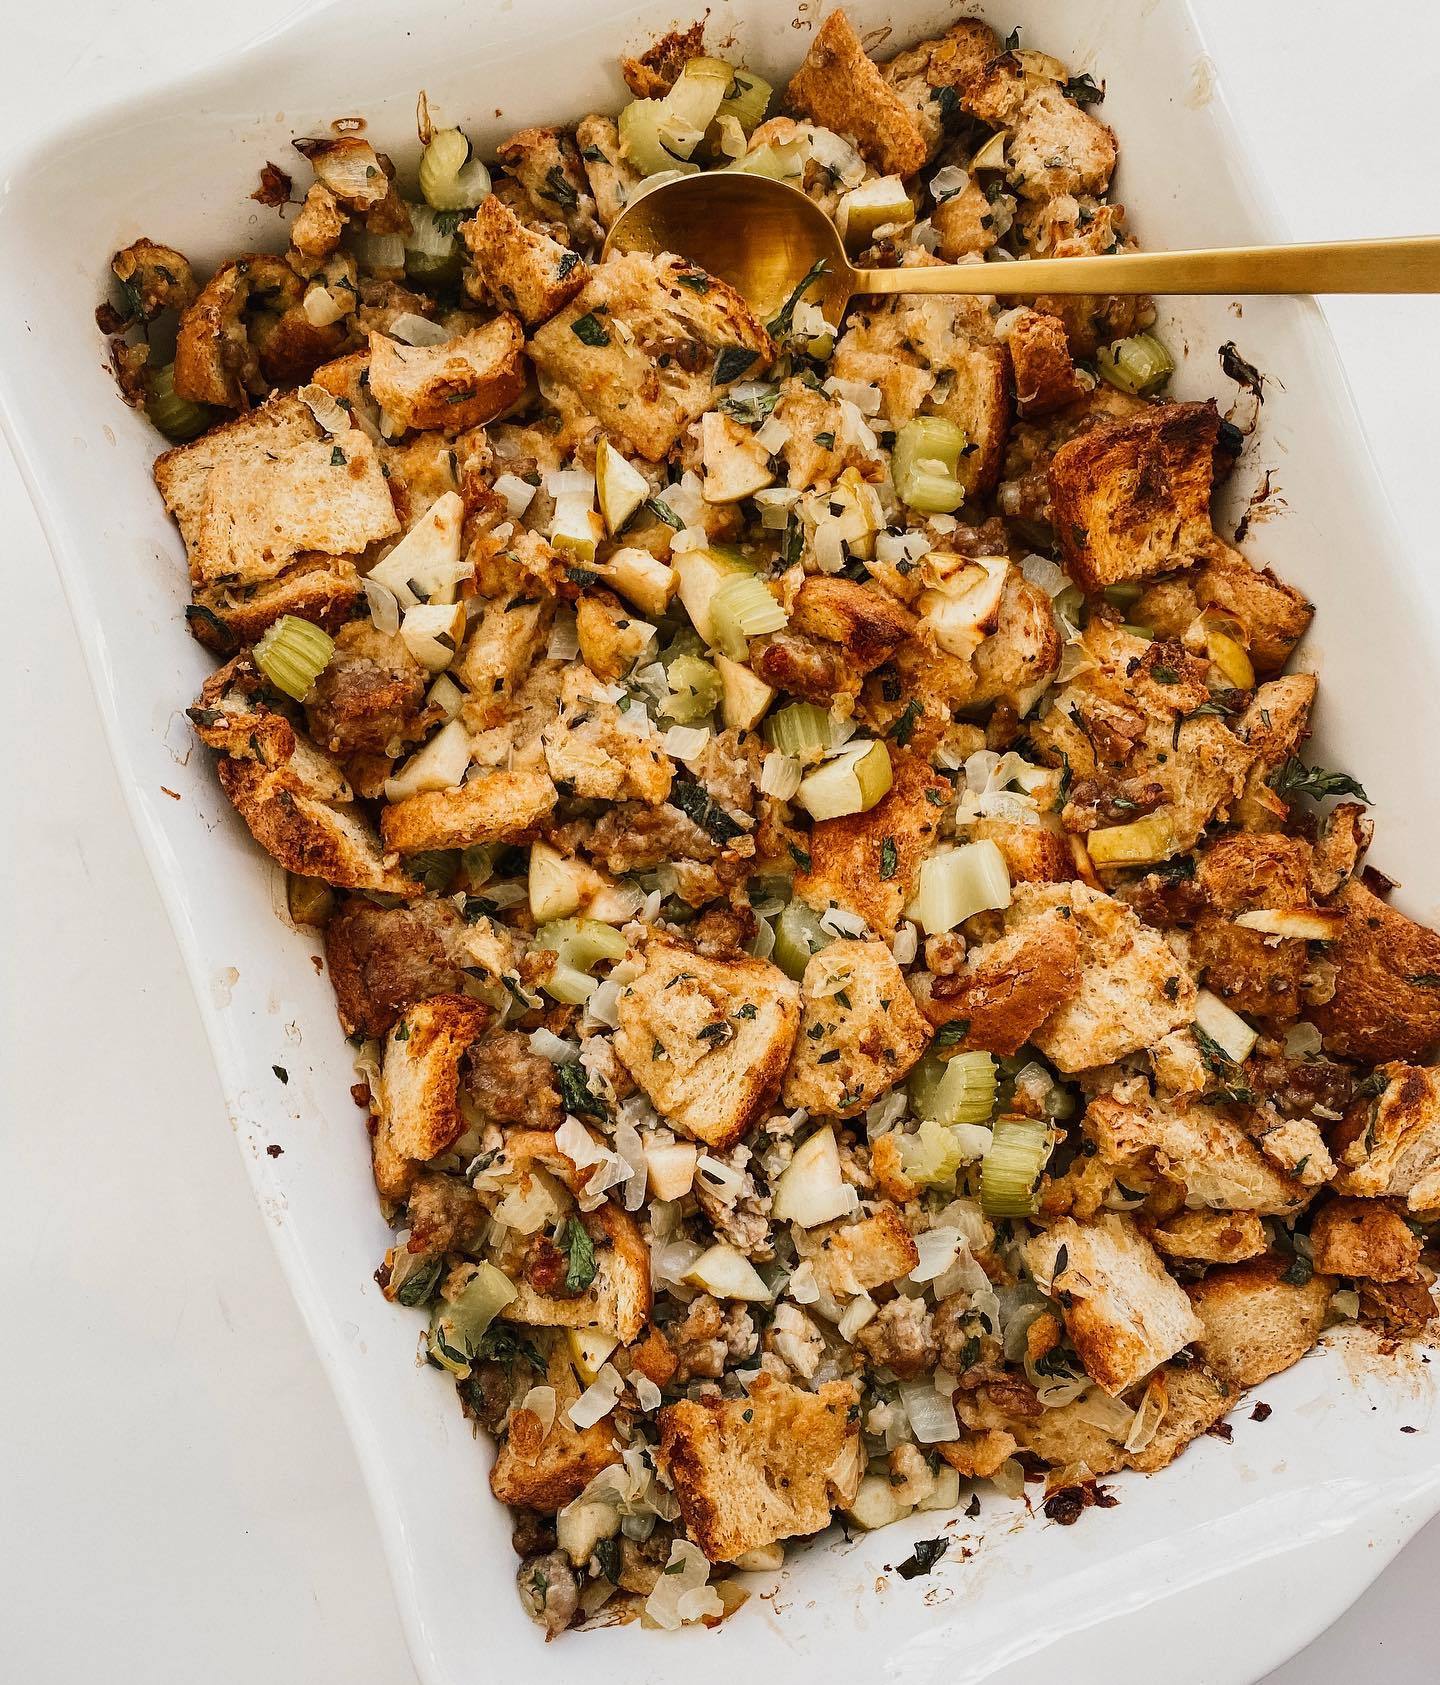 Gluten Free Stuffing recipe from @broccyourbody